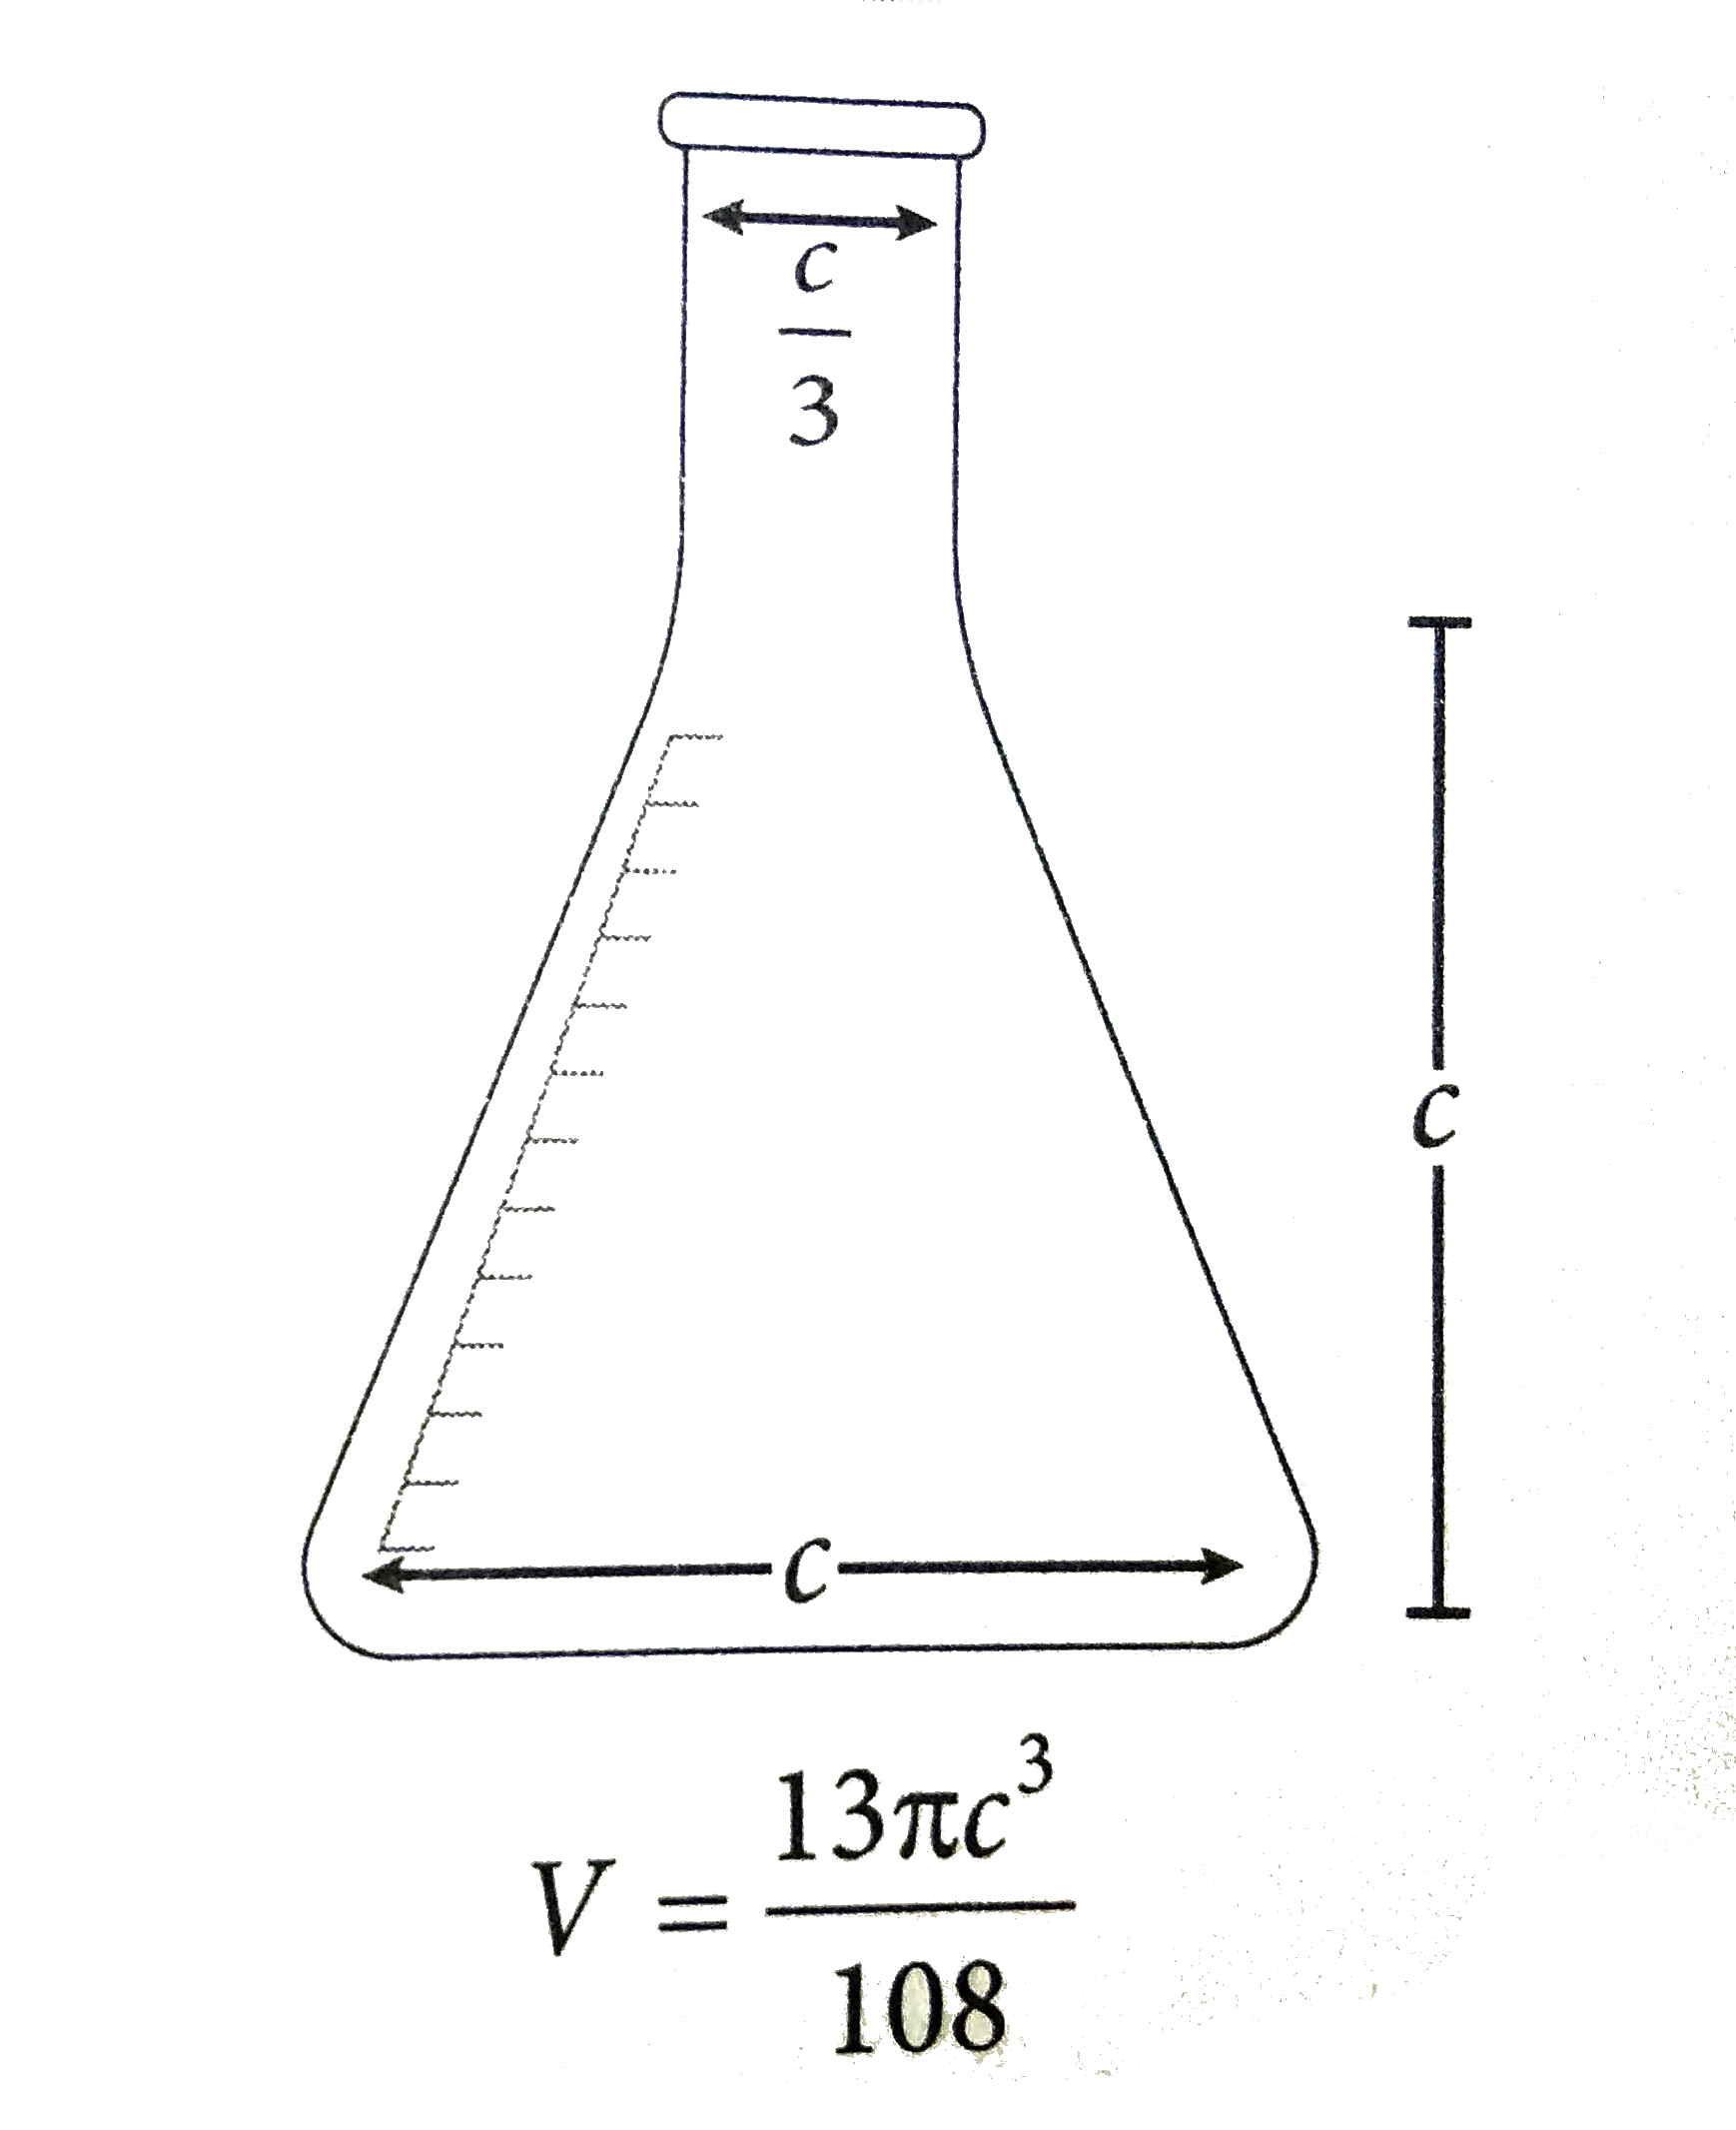 The maximum volume of the Erlenmeyer flask pictured above is 3.49 cubic inches, which is approximately 5.7 liters. What is the value of c, in inches?